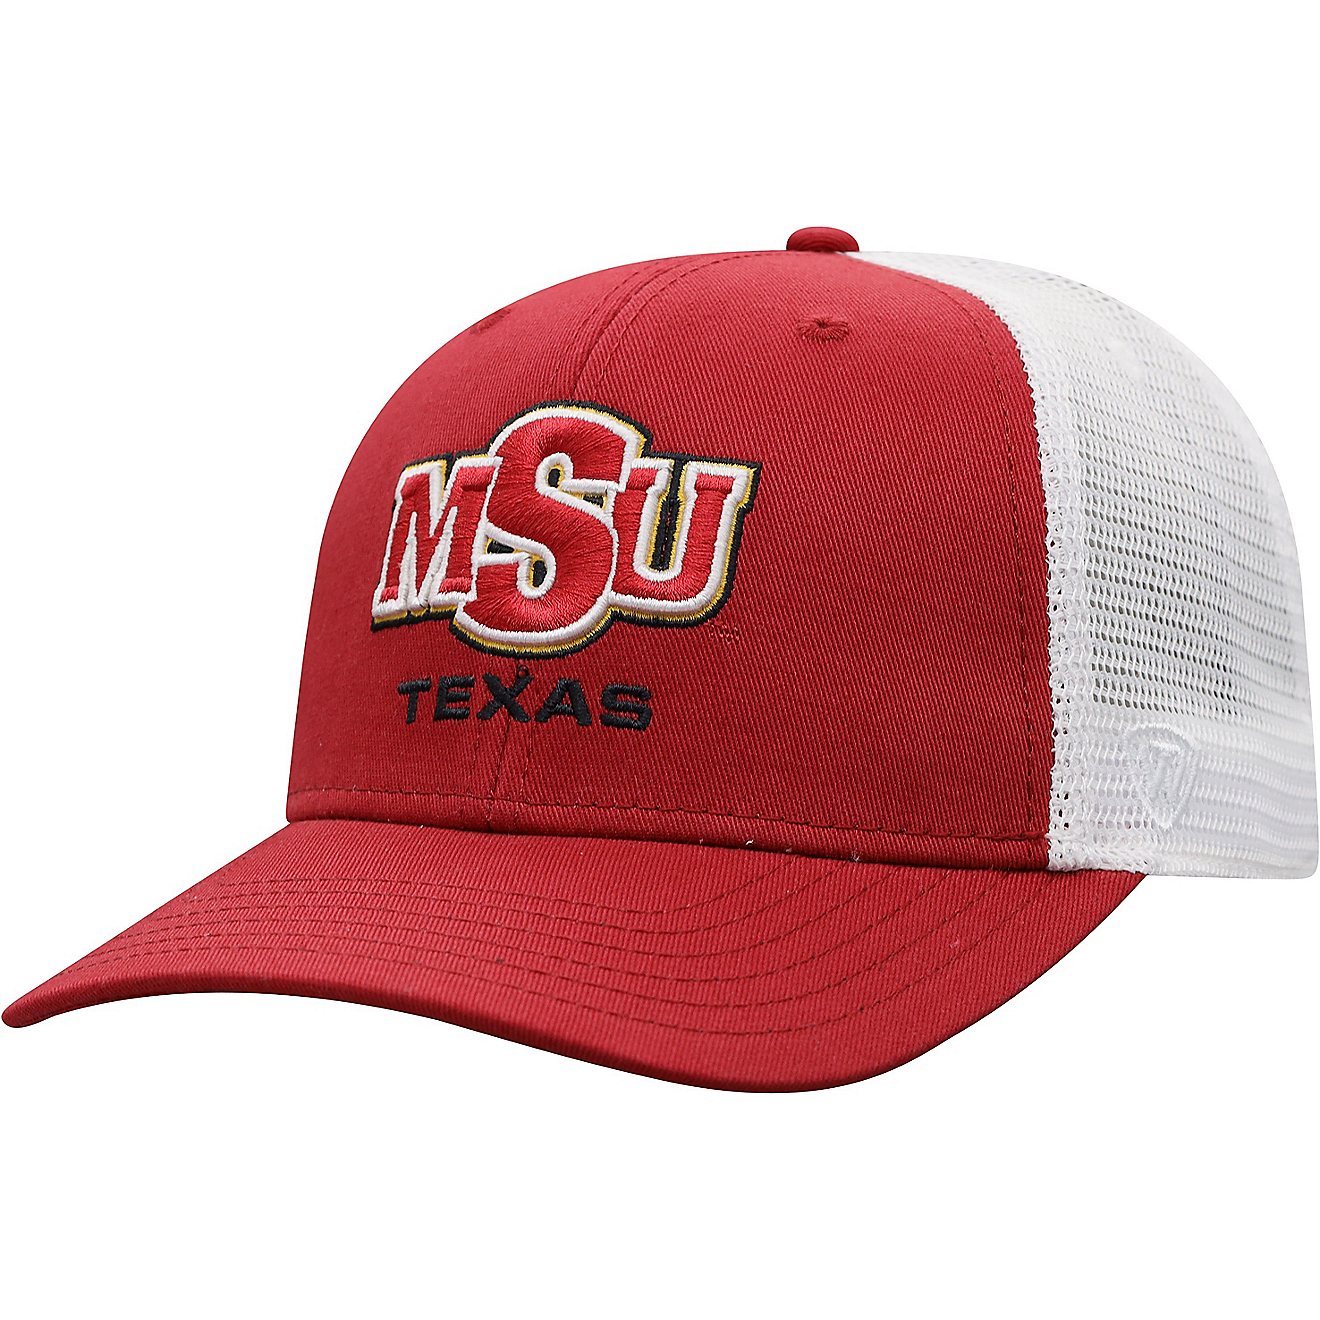 Top of the World Adults' Midwestern State University BB Adjustable Mesh 2-Tone Cap                                               - view number 1